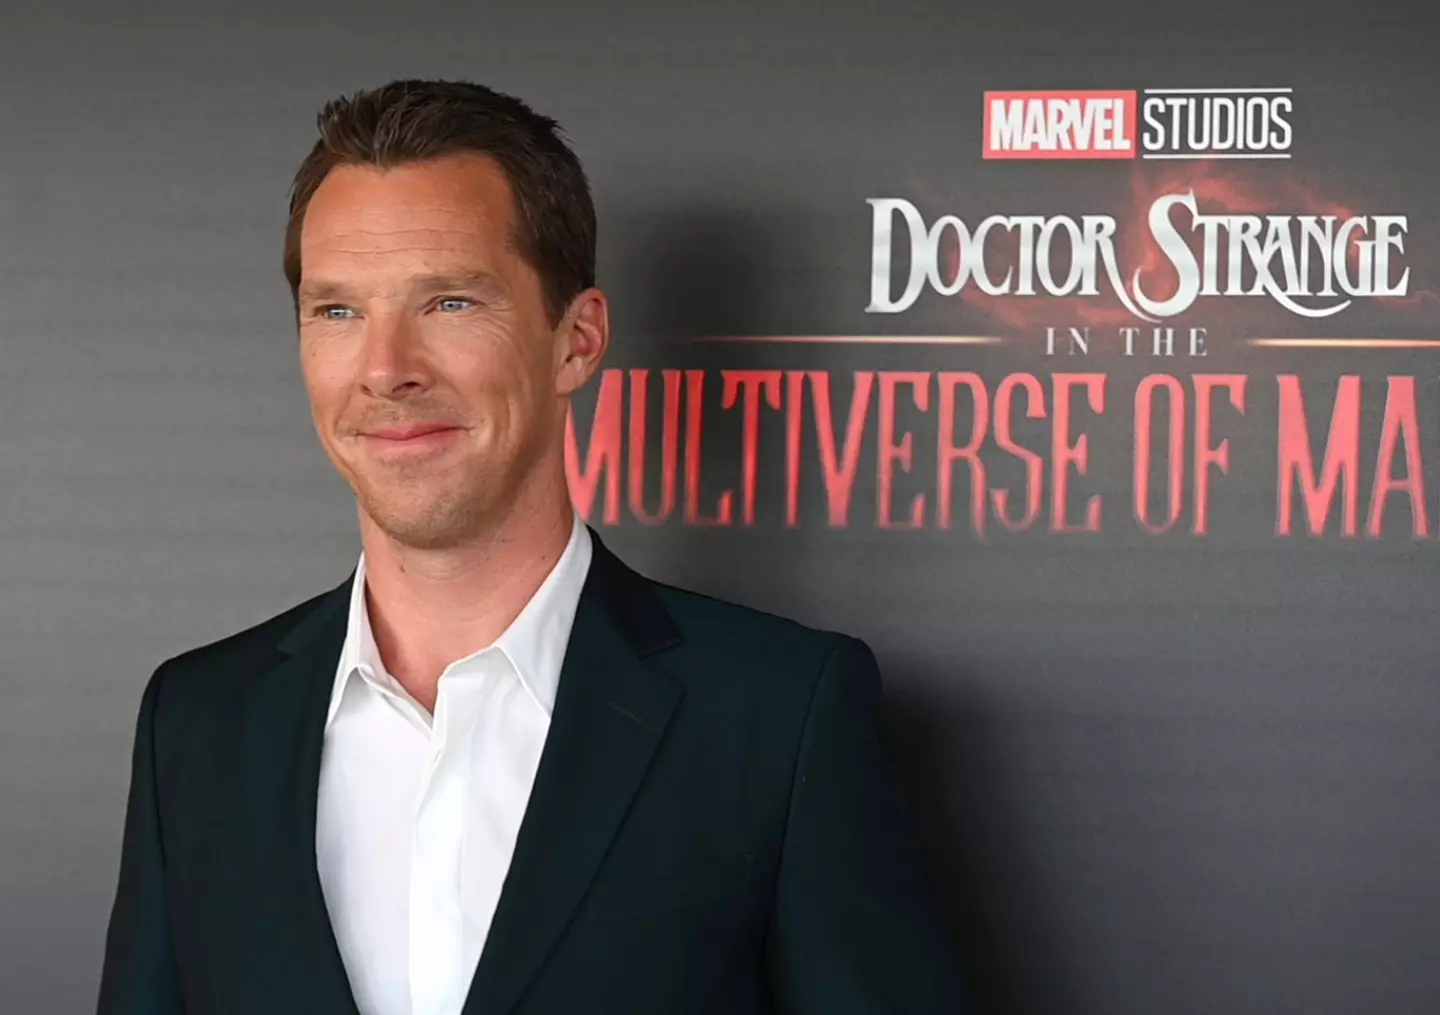 He's going to be back filming scenes as Doctor Strange next year.